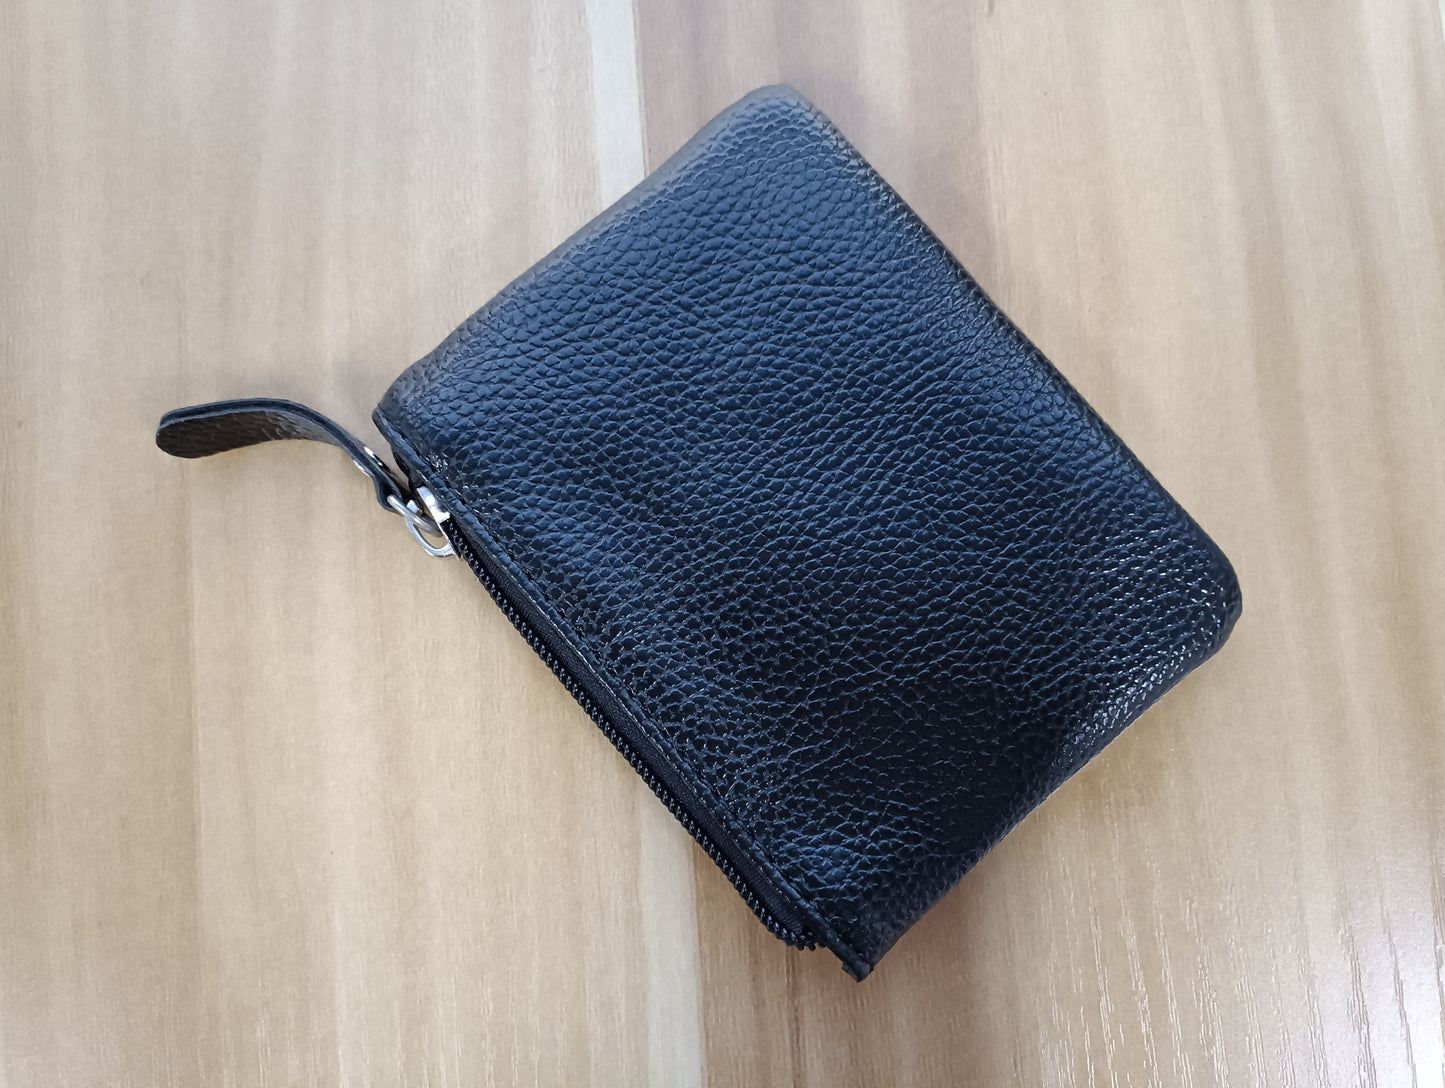 2M2 leather pouches mini coin purse men and women ultra-thin zipper coin bag short small wallet soft leather clutch small bag key bag card bag leather pouches